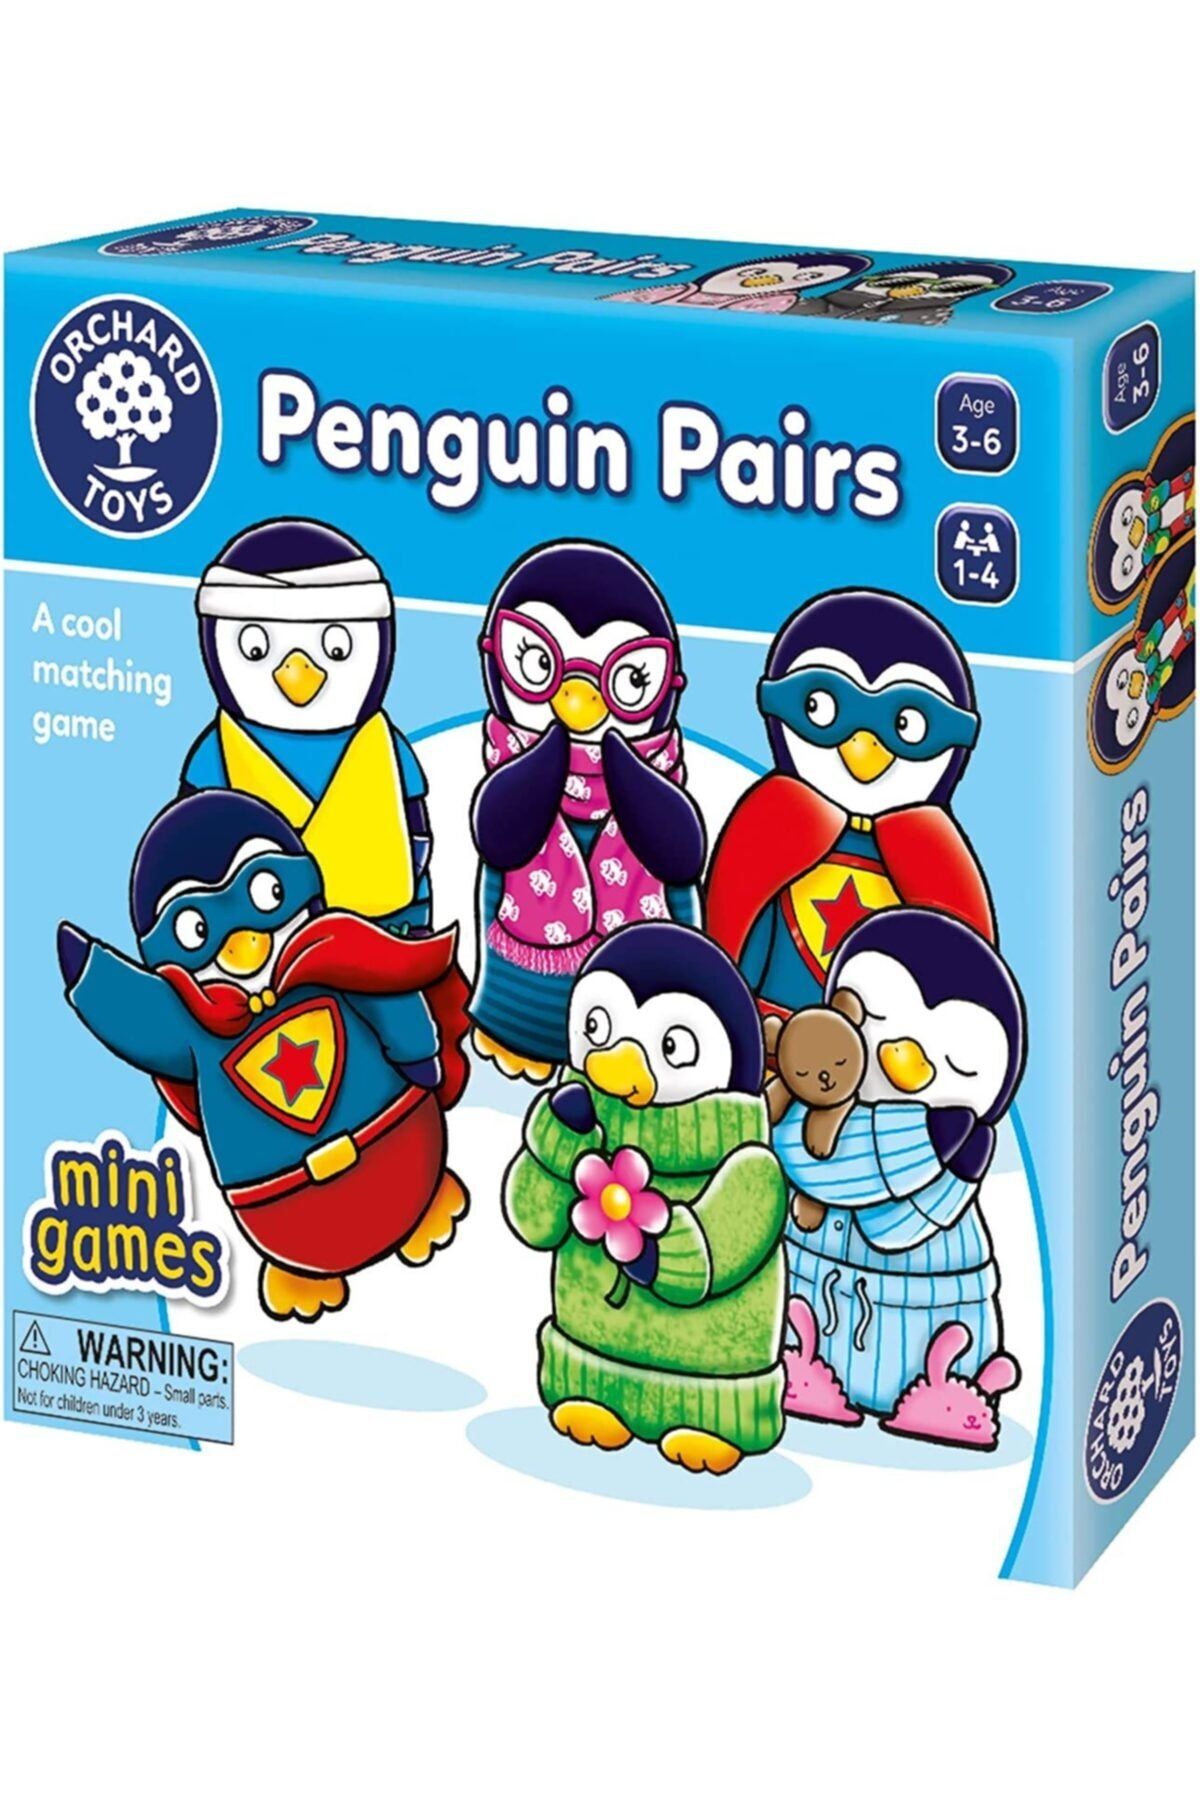 ORCHARD Penguin Pairs - A Cool Matching Game